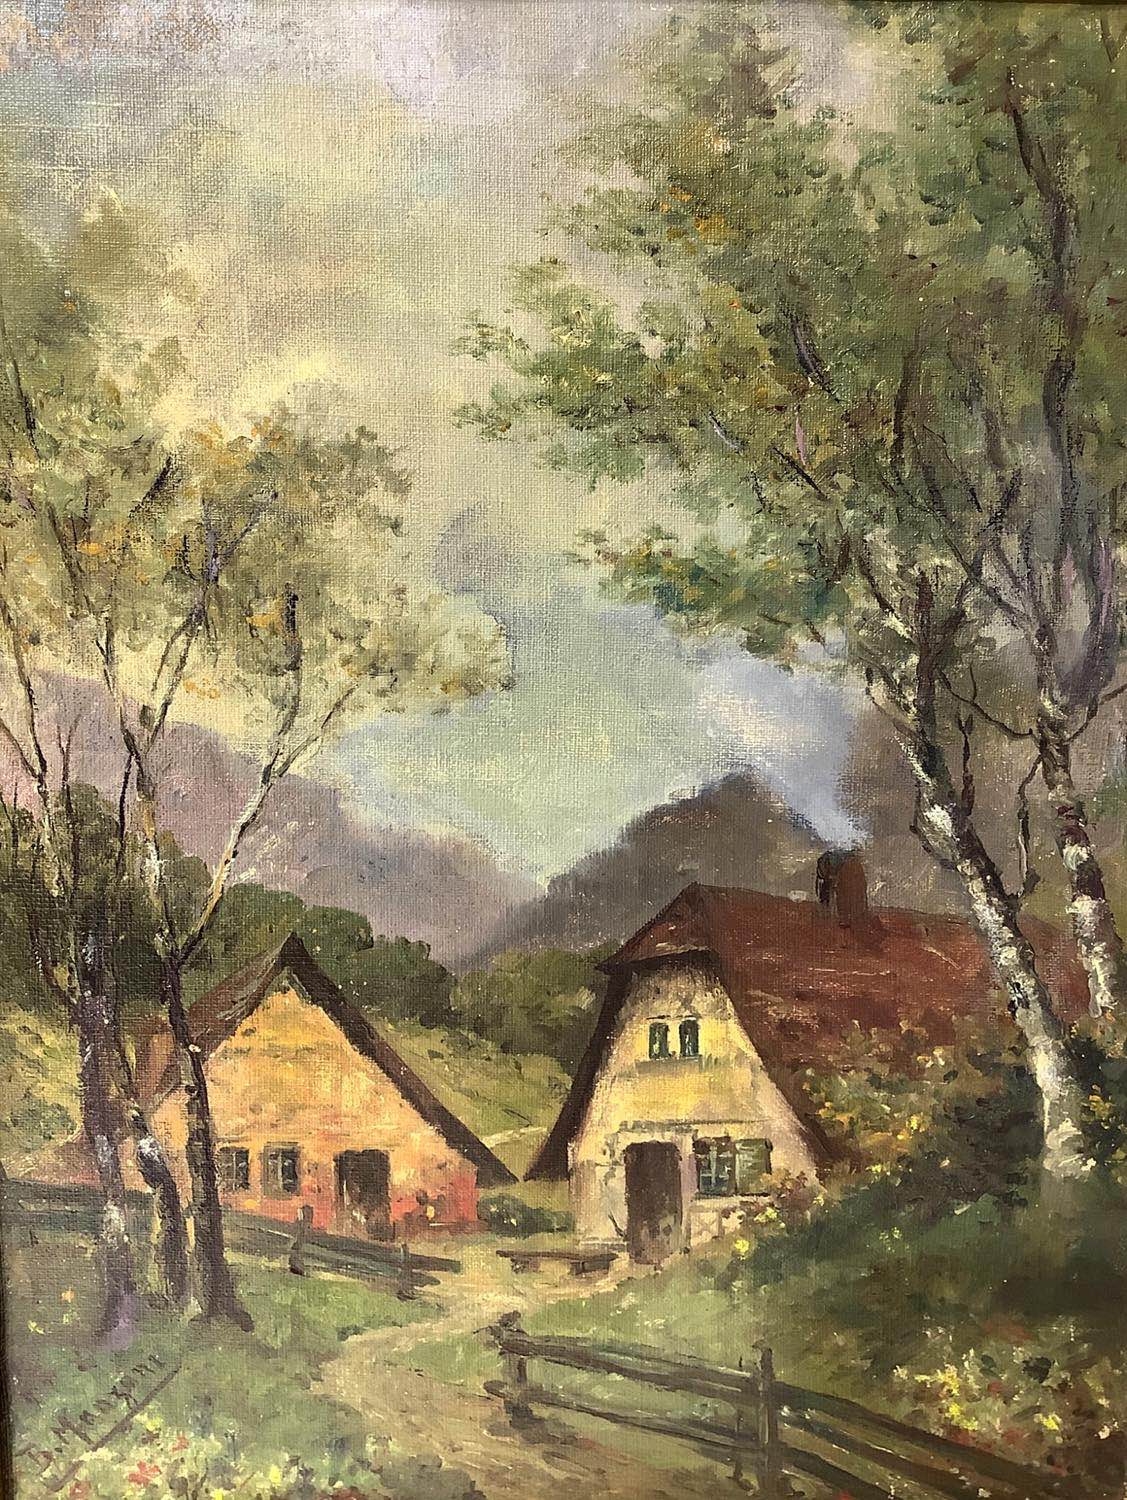 Artwork by Biagio Manzoni, Landscapes and houses, Made of Oil painting on canvas